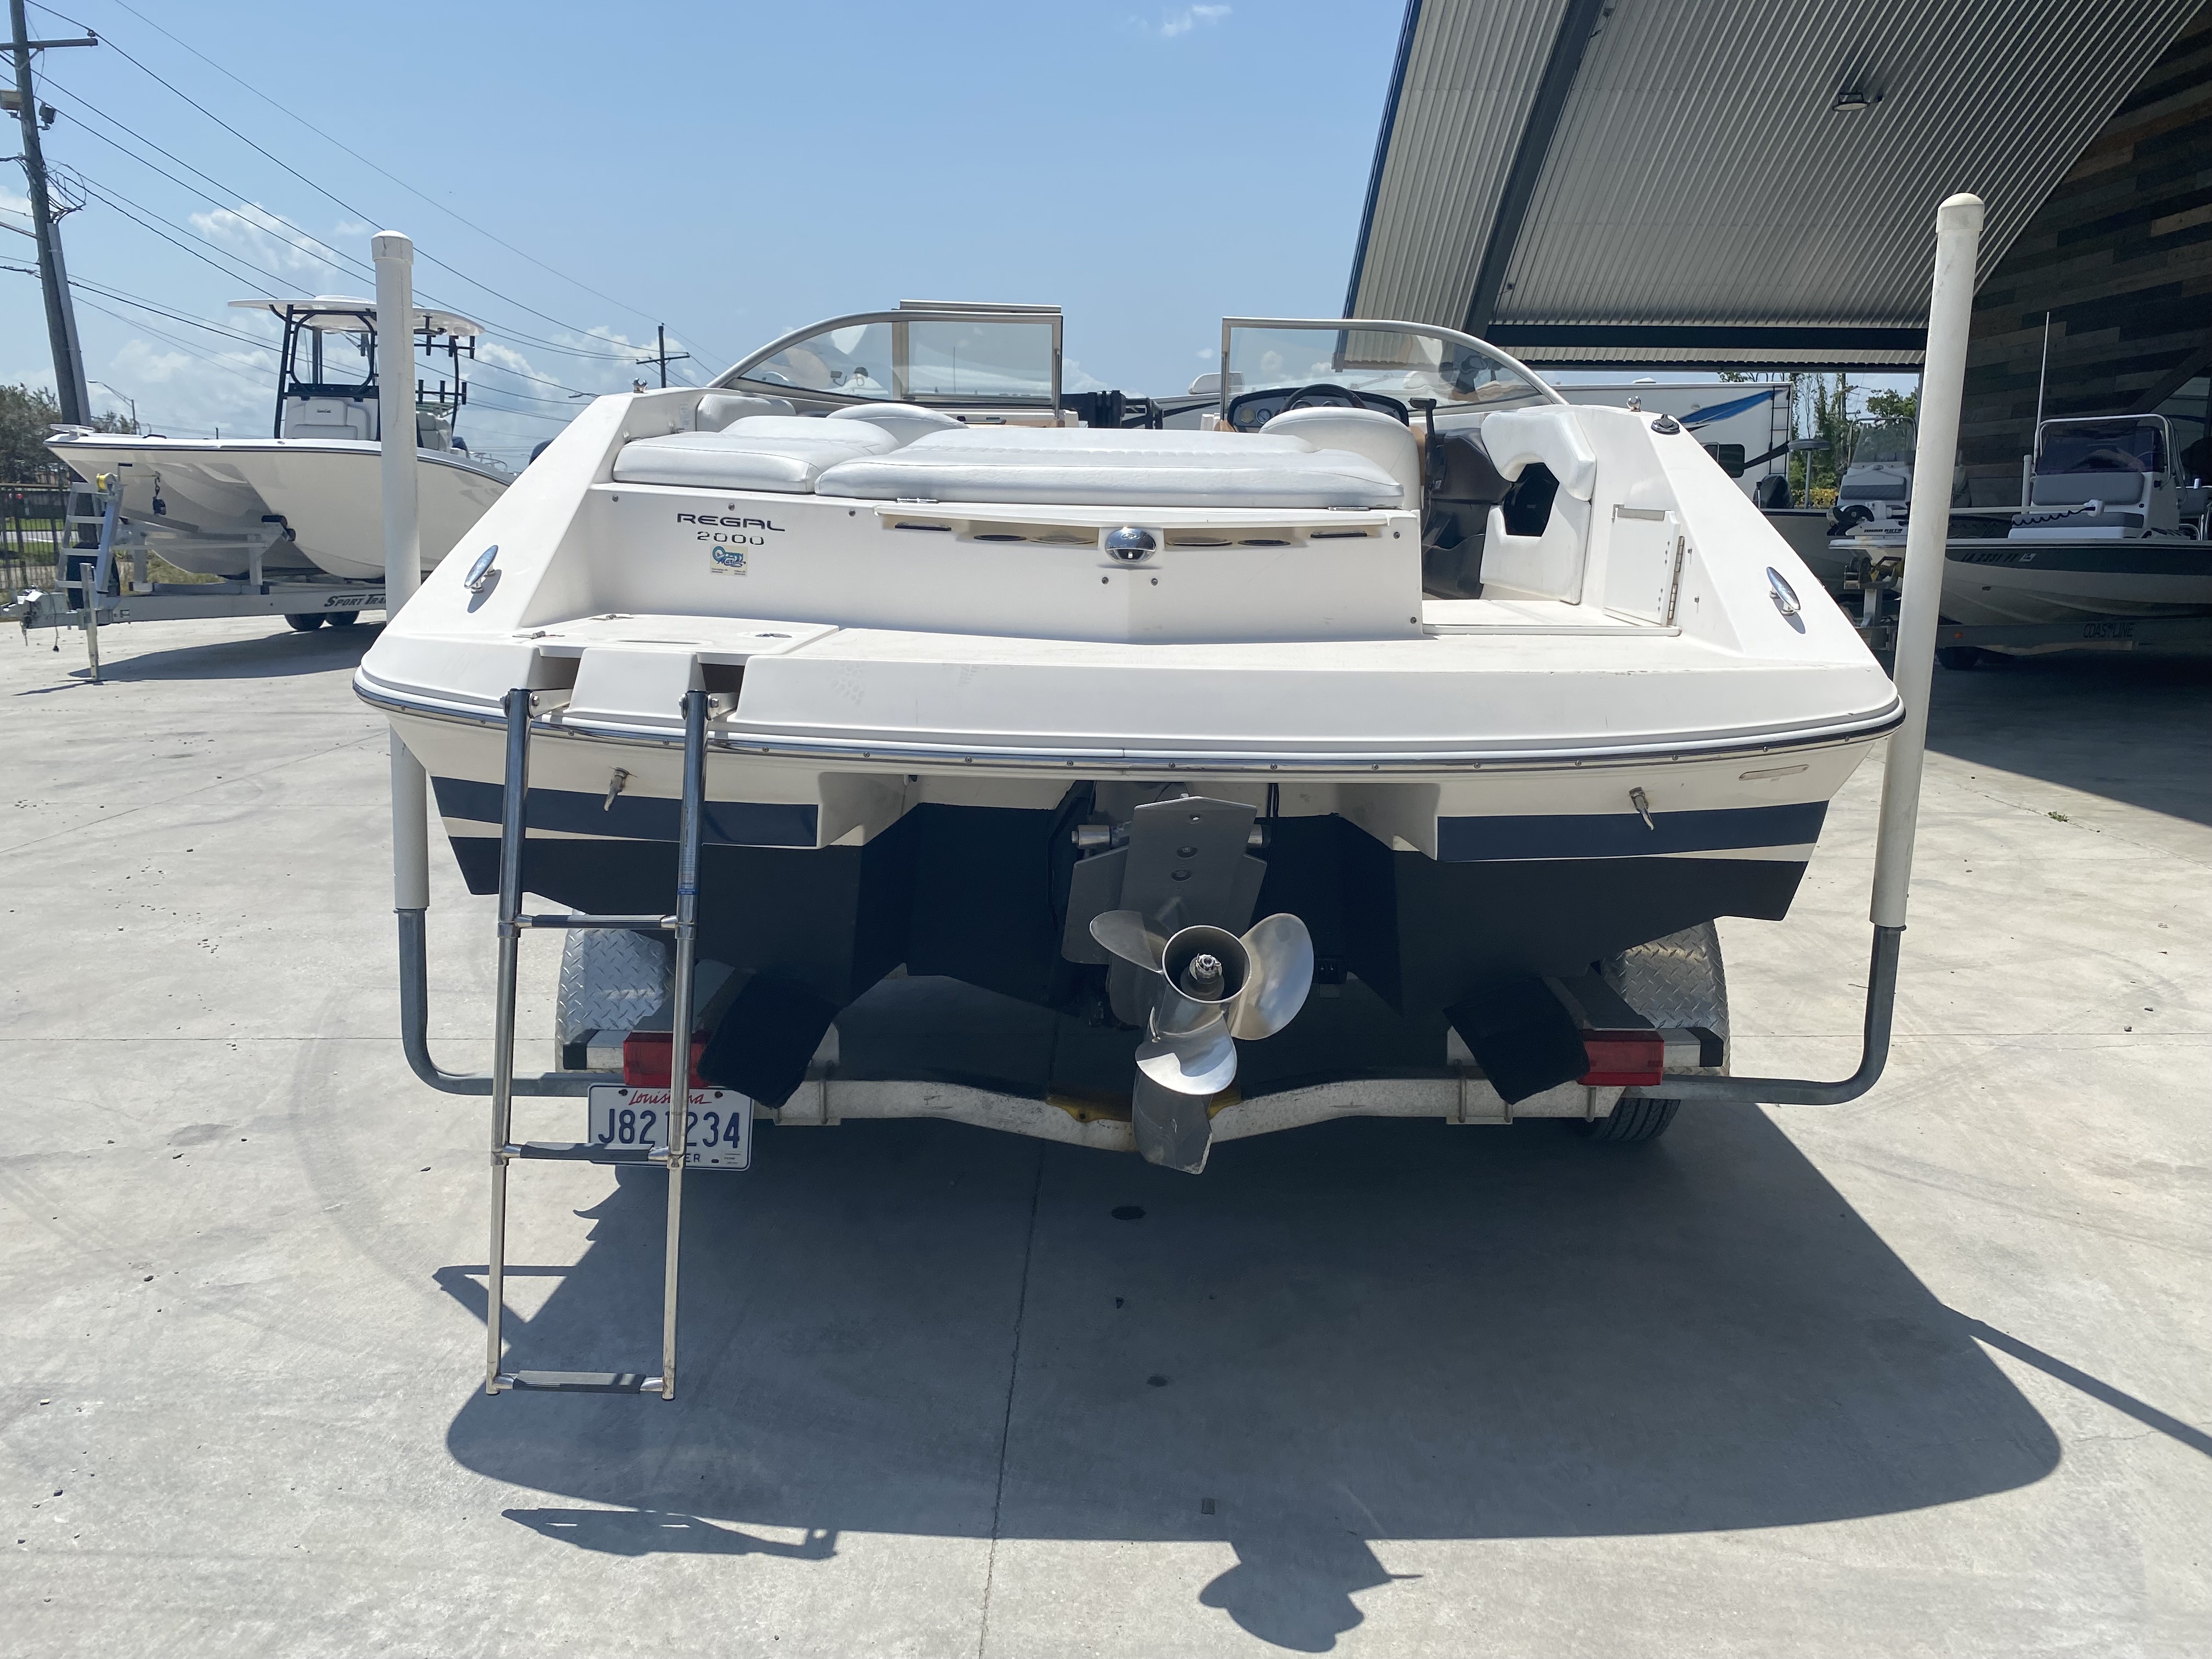 2007 Regal boat for sale, model of the boat is Sport Boat 2000 Bowrider & Image # 7 of 11